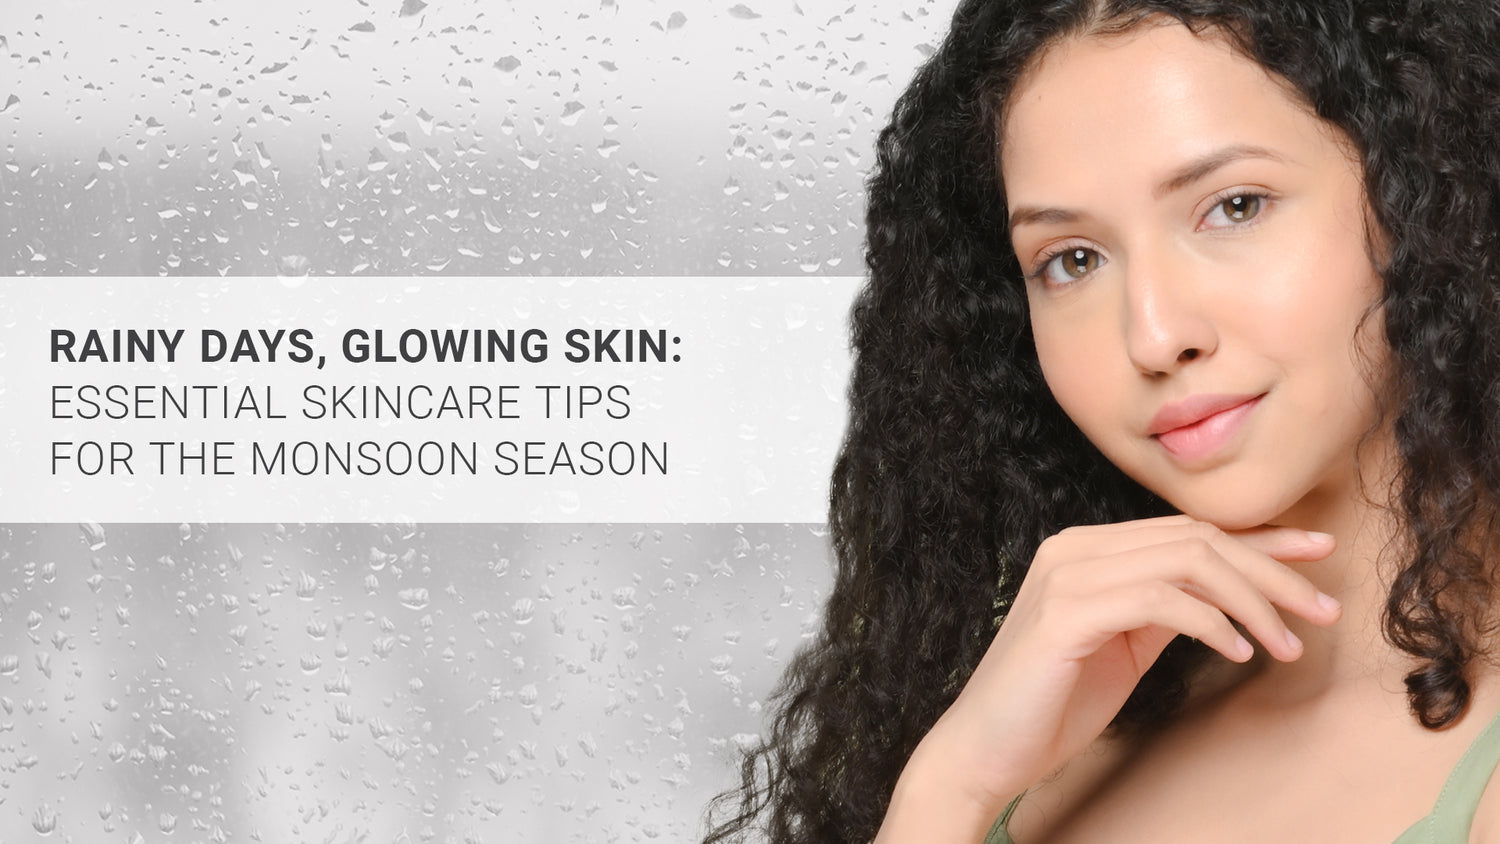 Rainy Days, Glowing Skin: Essential Skincare Tips for the Monsoon Season